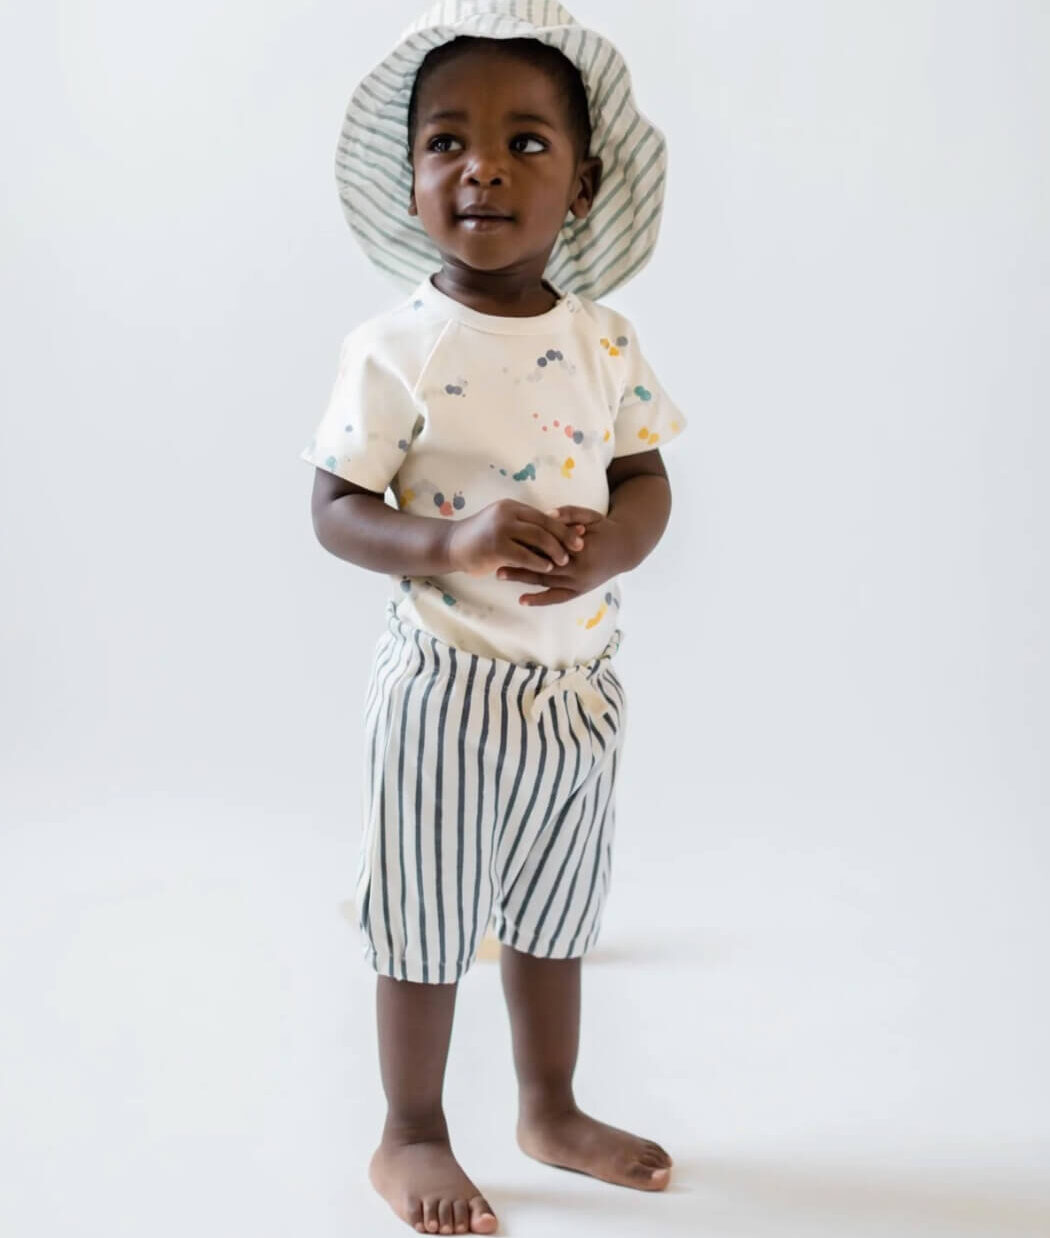 A baby wearing a striped bucket hat, an abstract print shirt and striped shorts from Pehr.